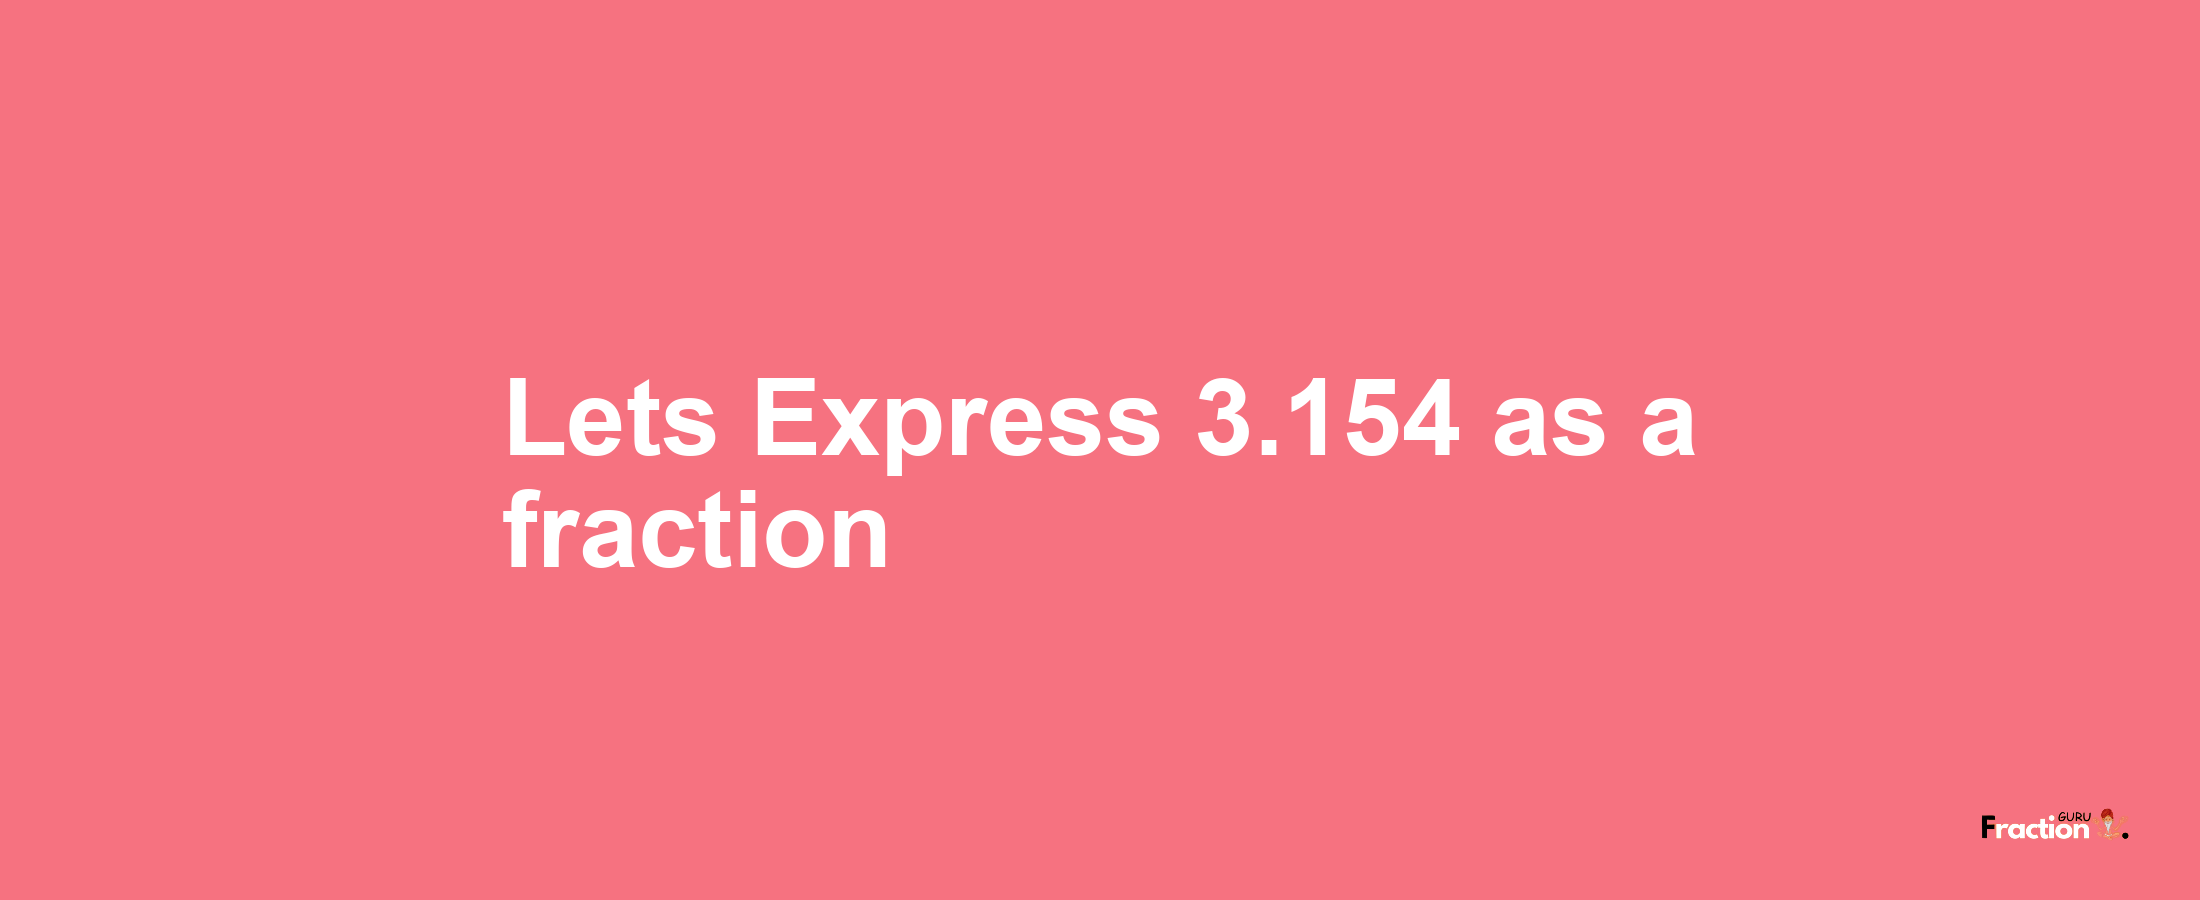 Lets Express 3.154 as afraction